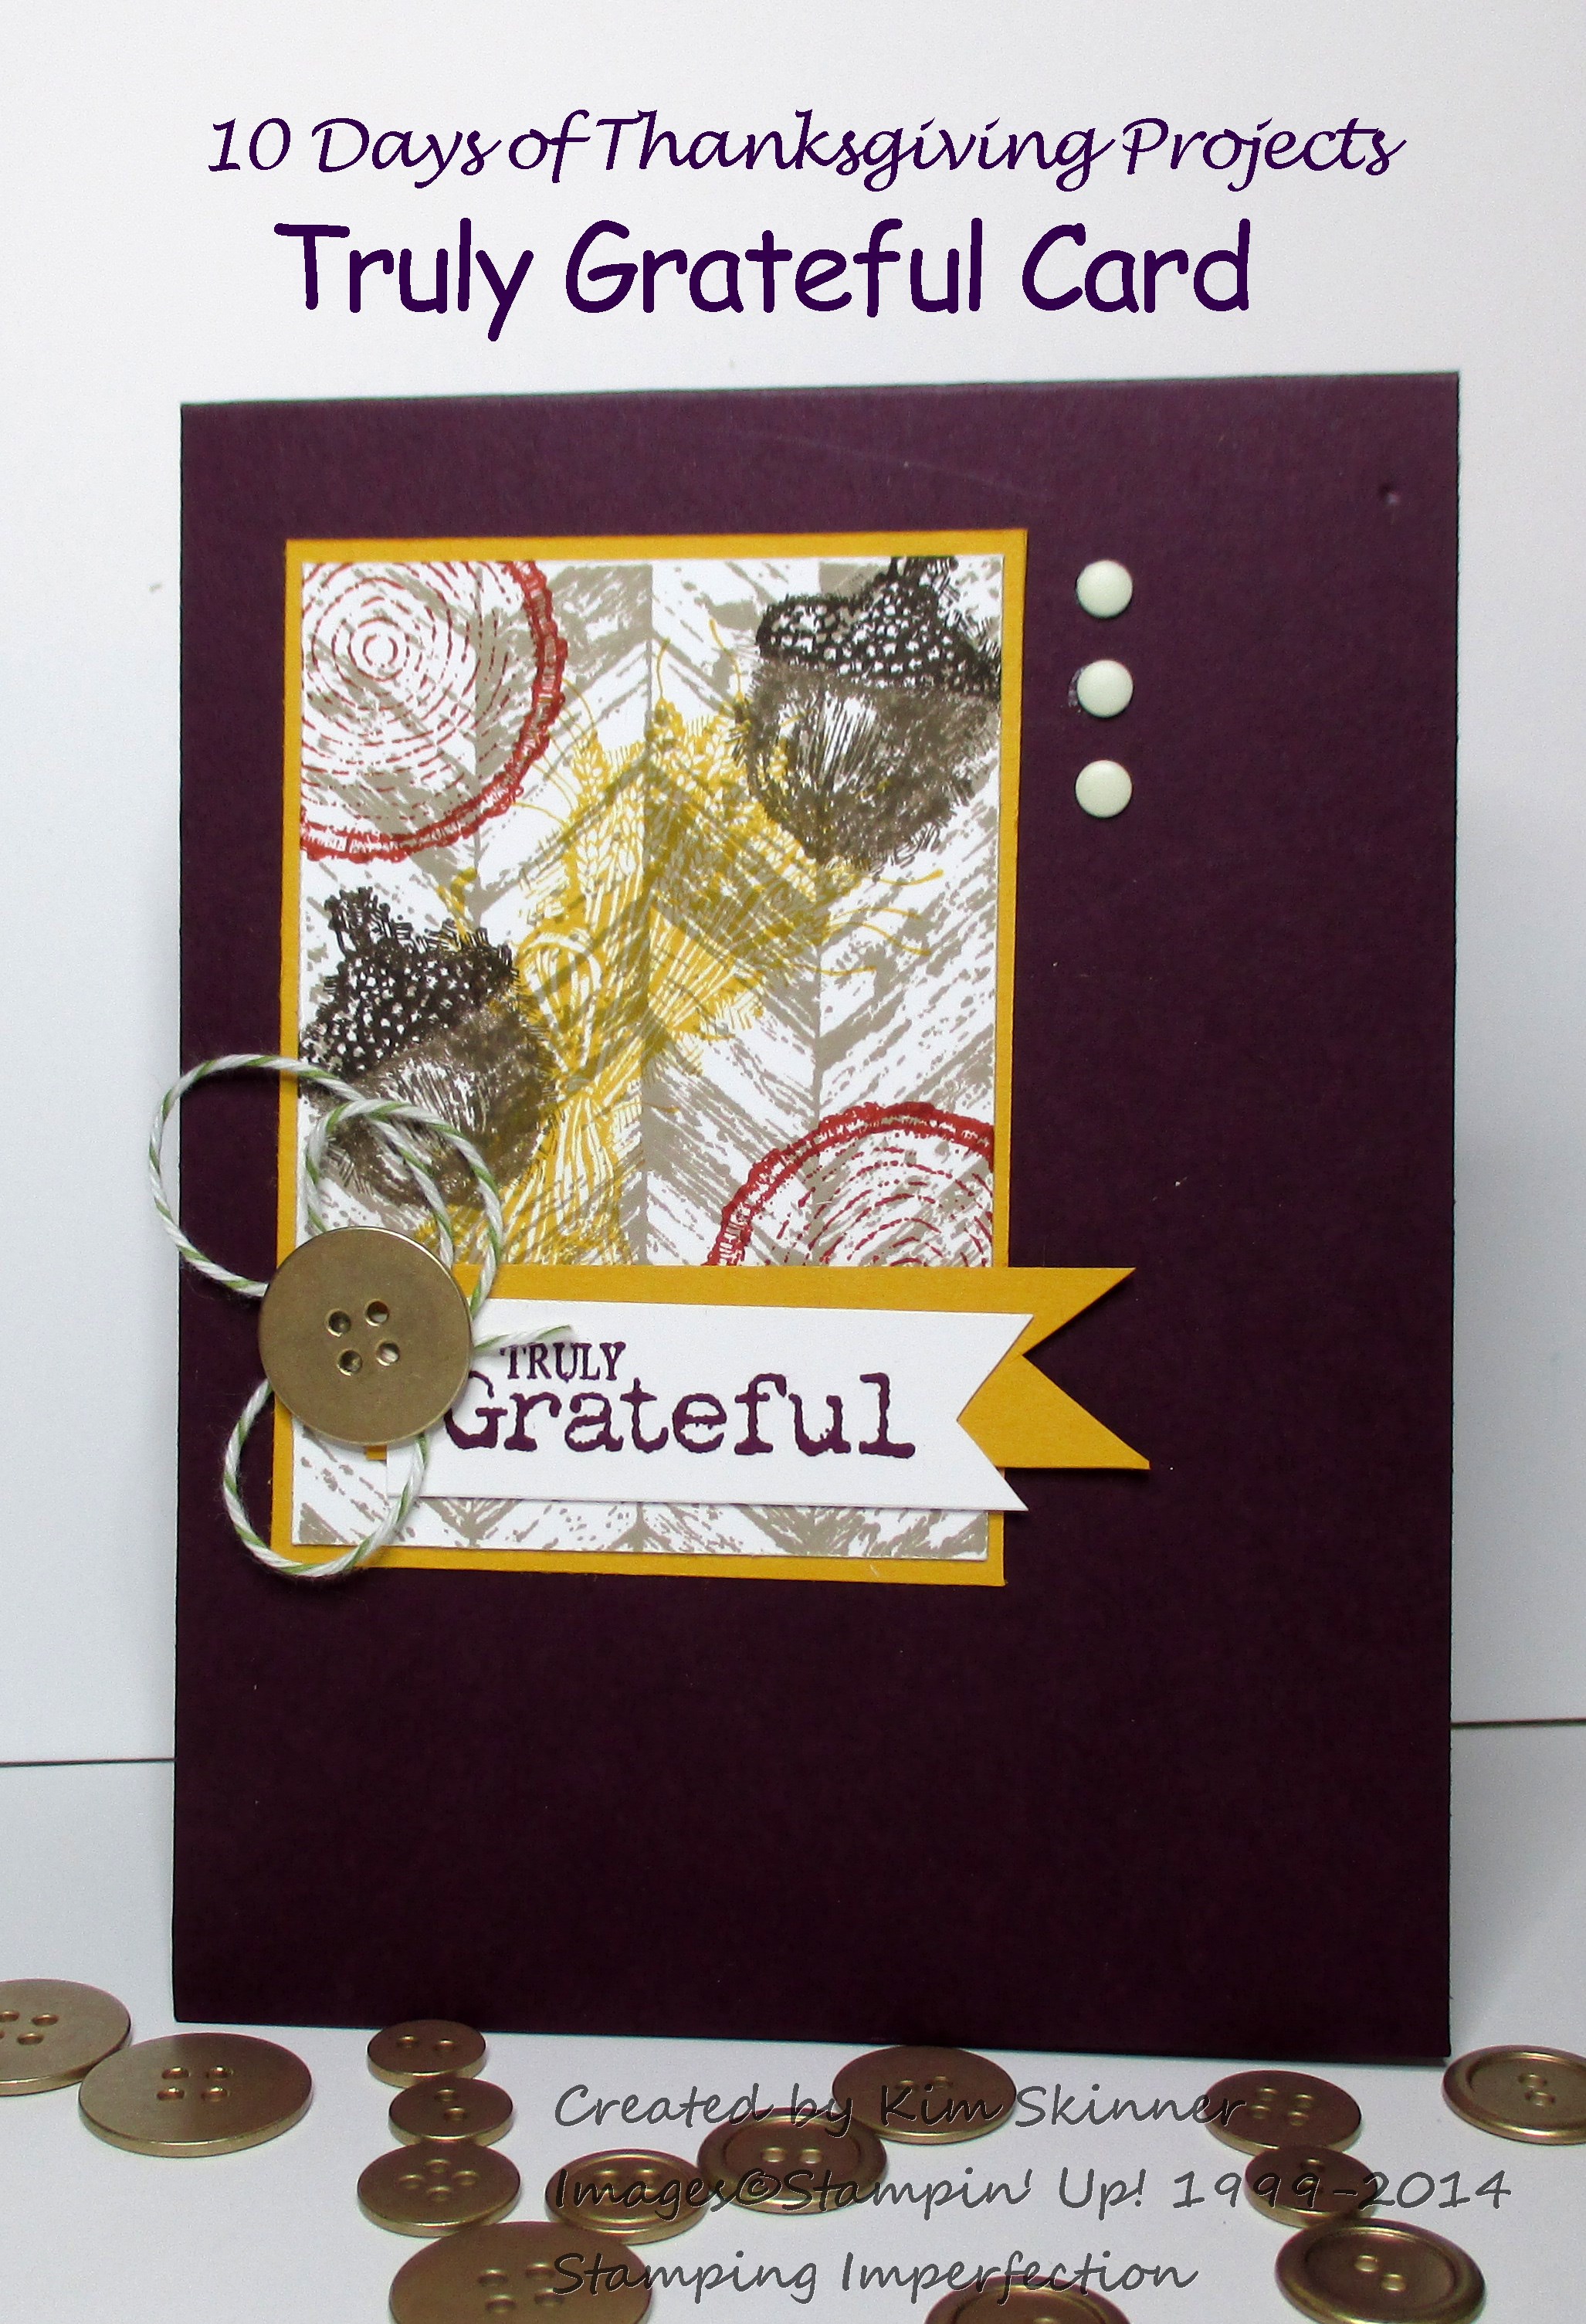 10 Days of Thanksgiving Projects: Truly Grateful Card